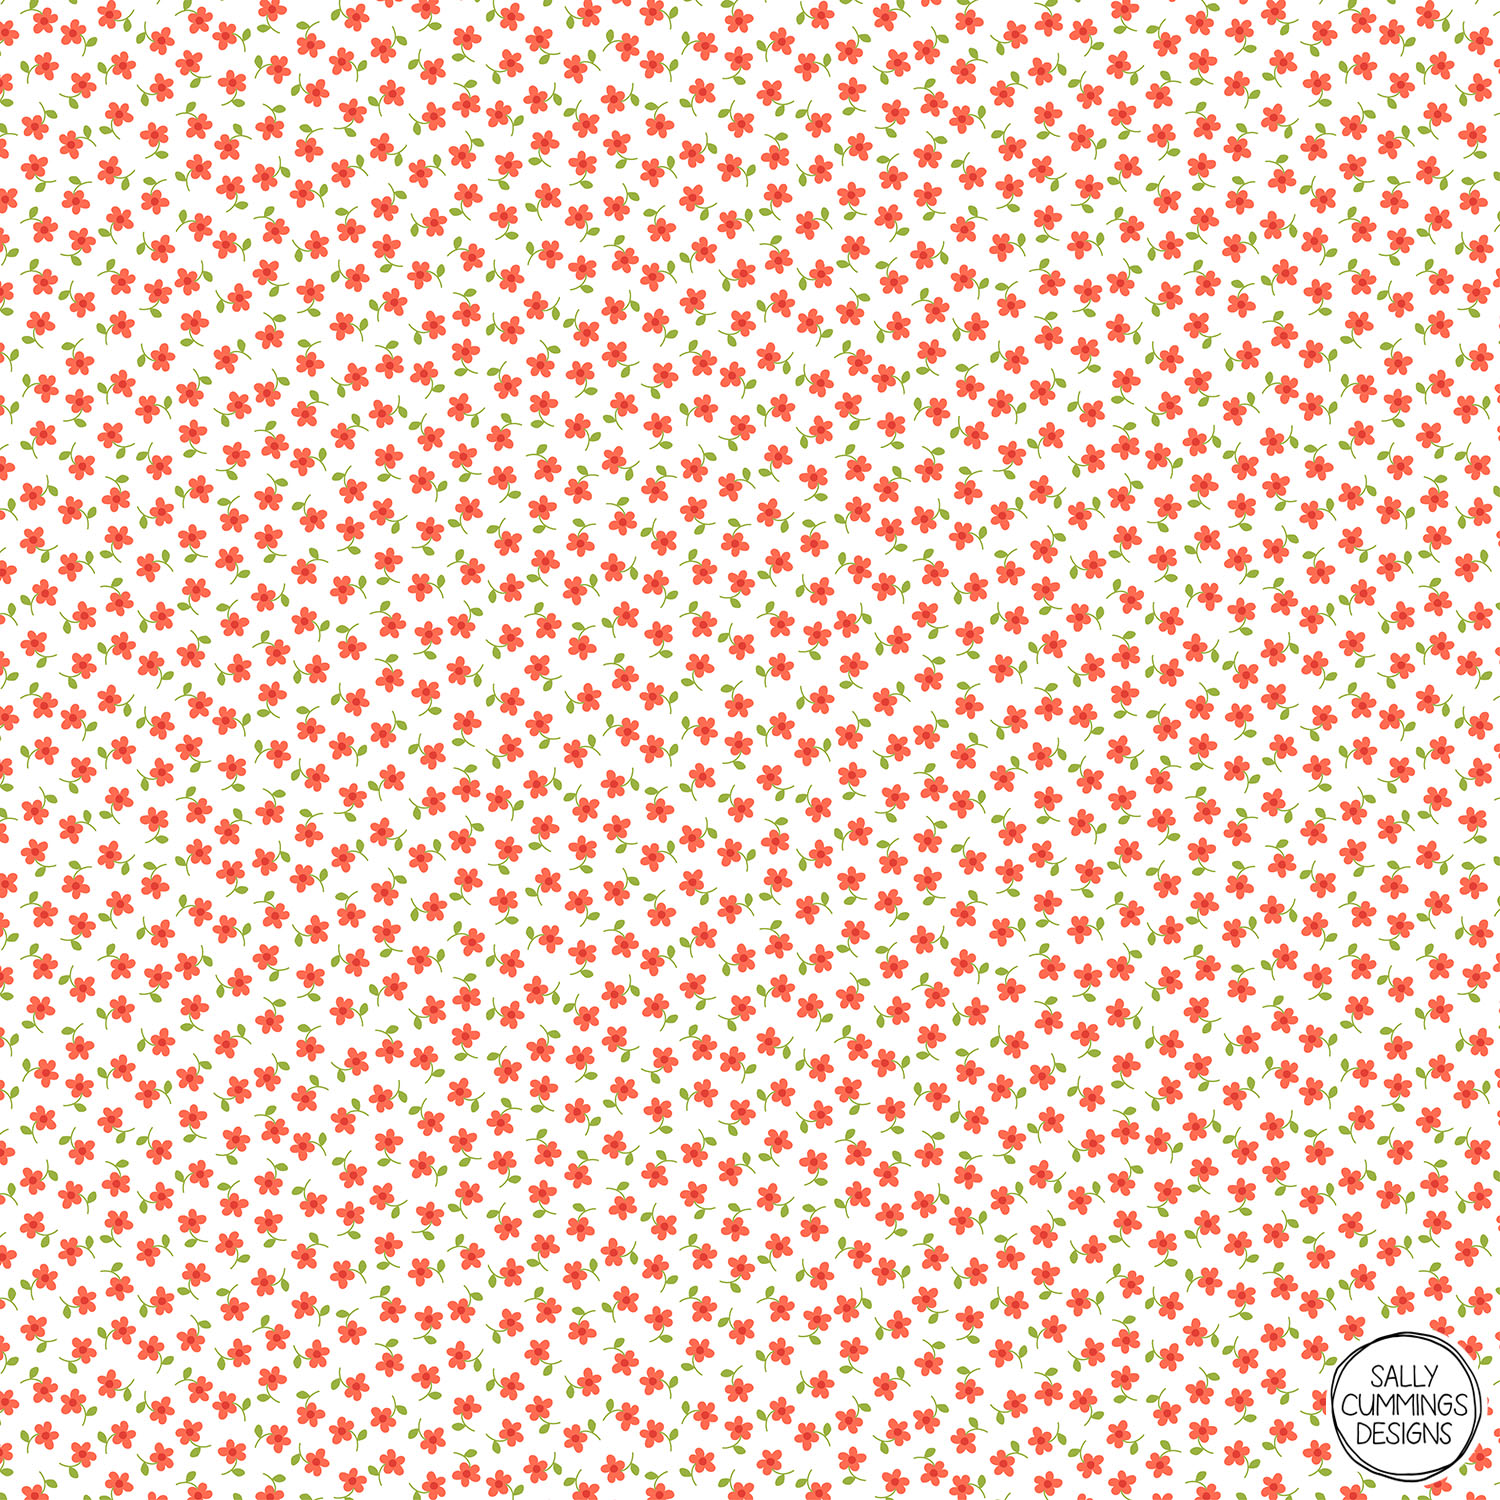 Sally Cummings Designs - Ditsy Floral Pattern (Coral and Green on White)